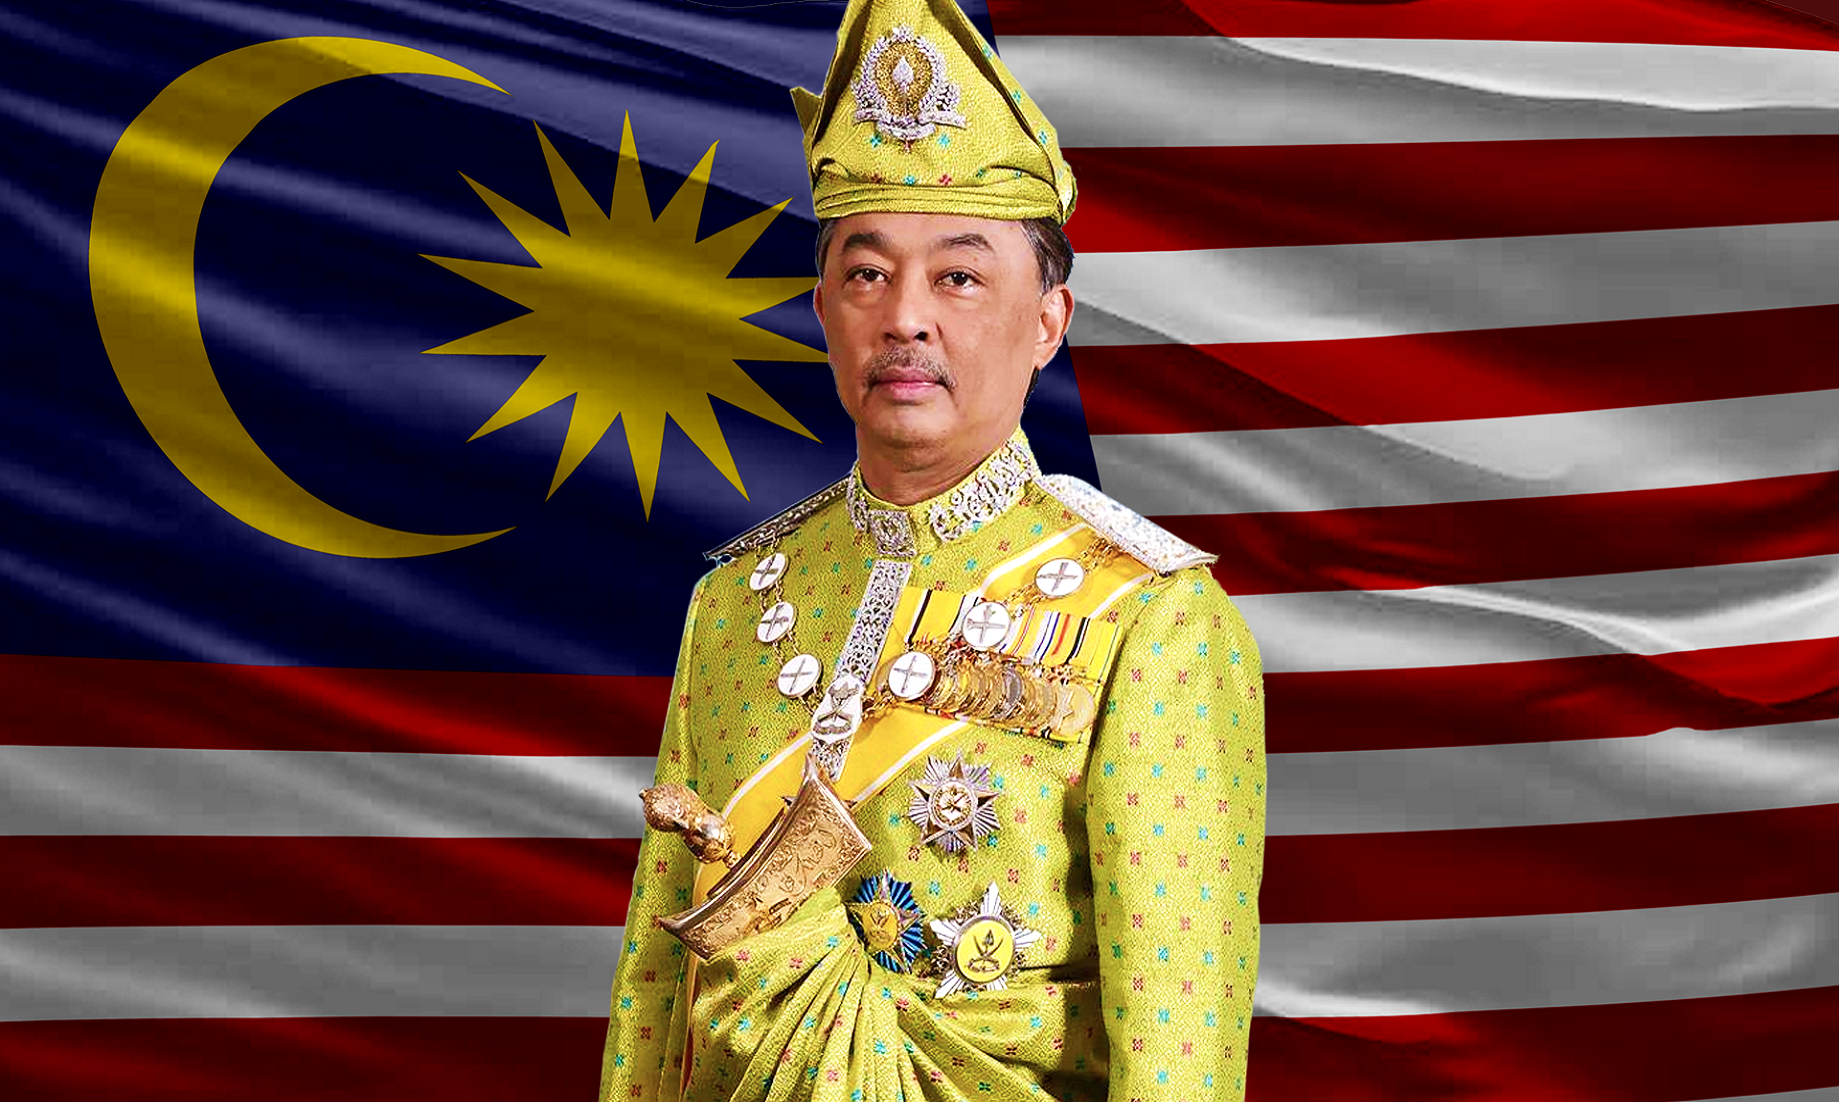 The King Urges Malaysians To Set Aside Differences In Fight Against COVID-19